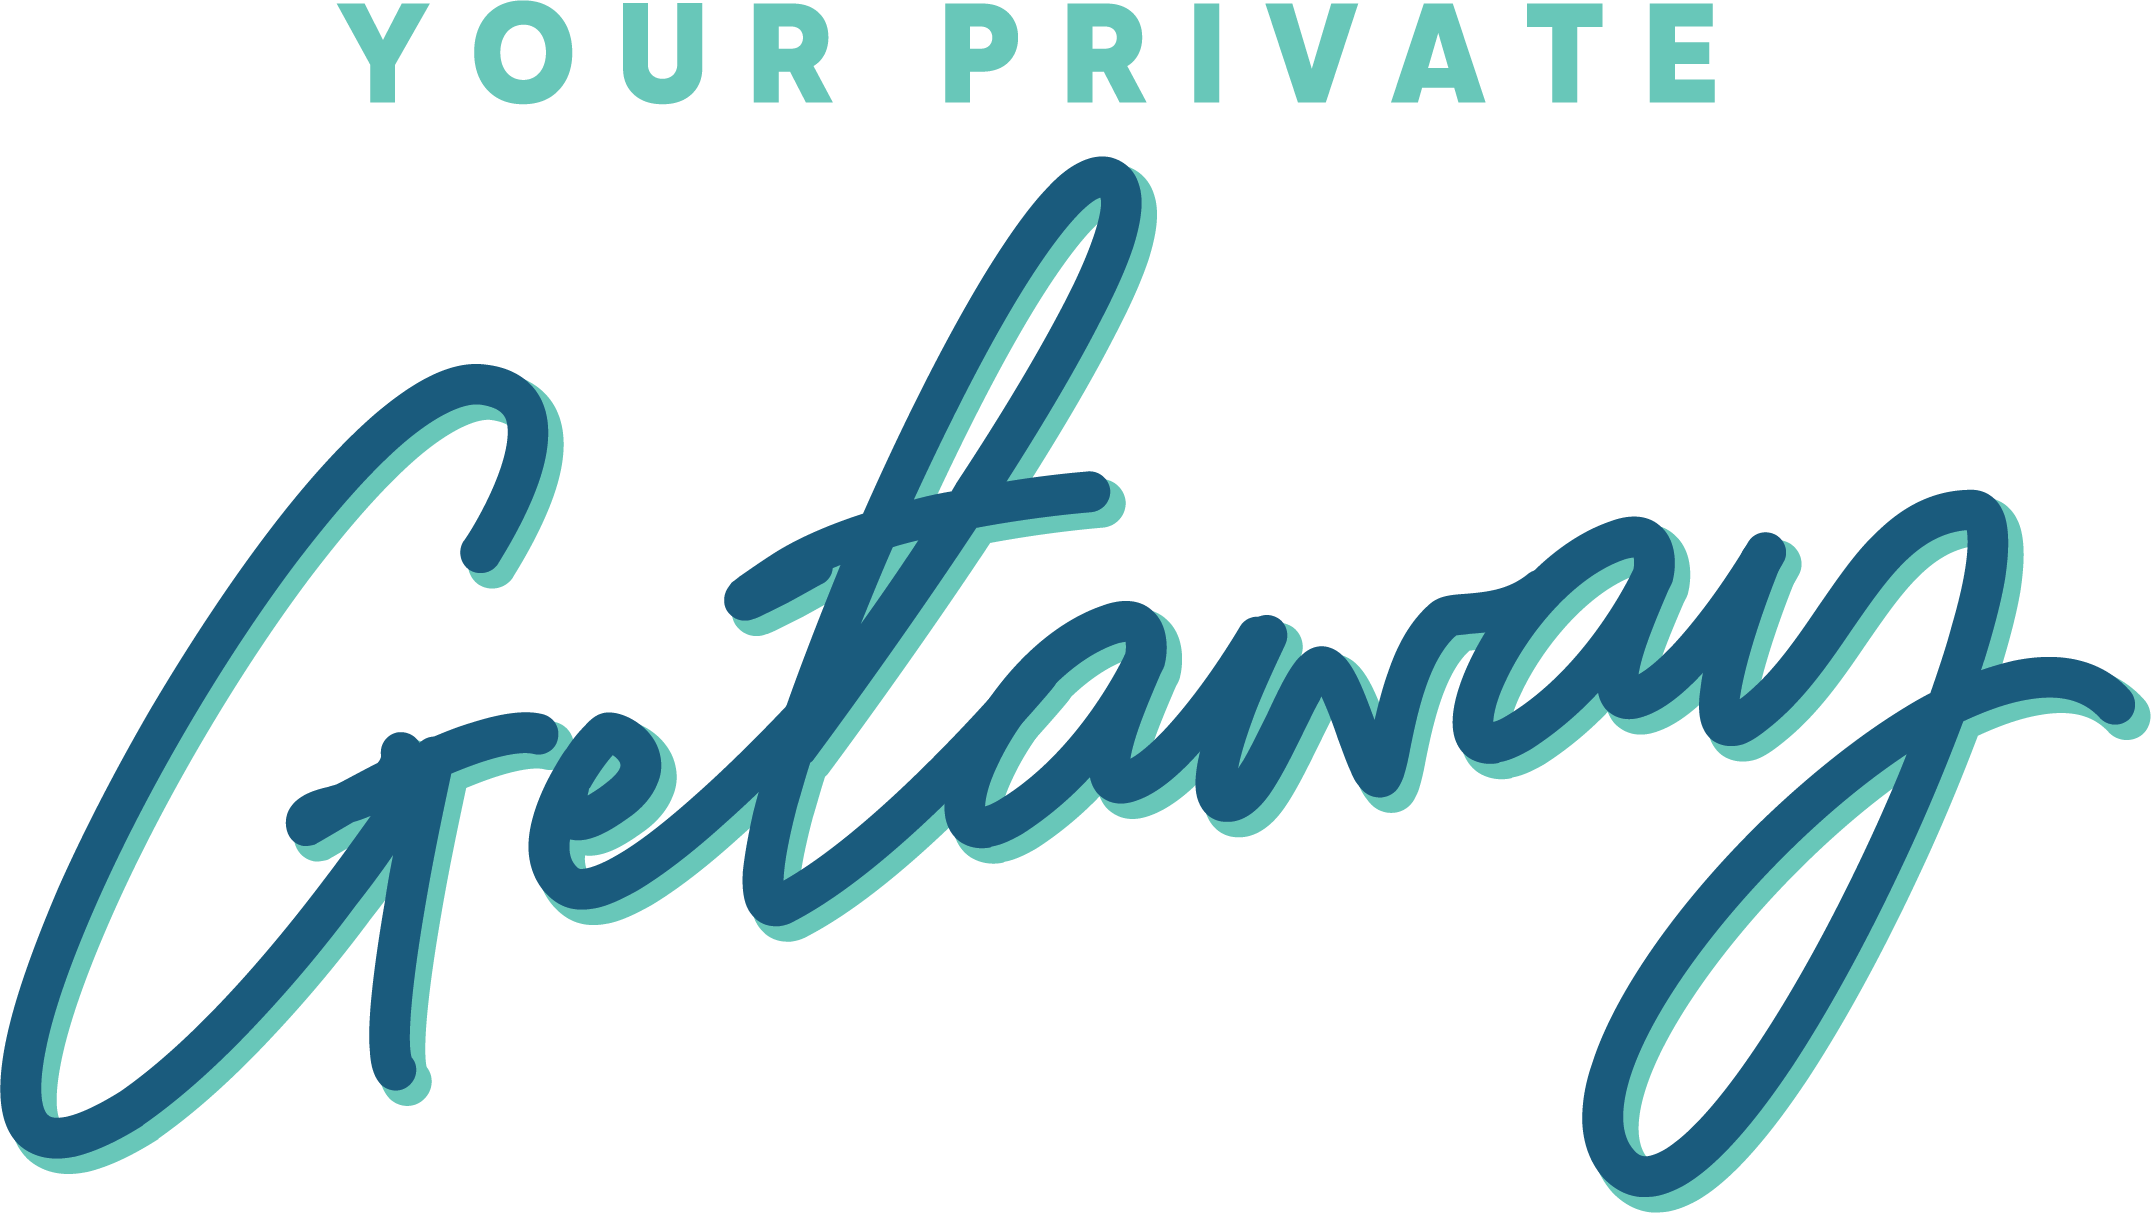 Your Private Getaway